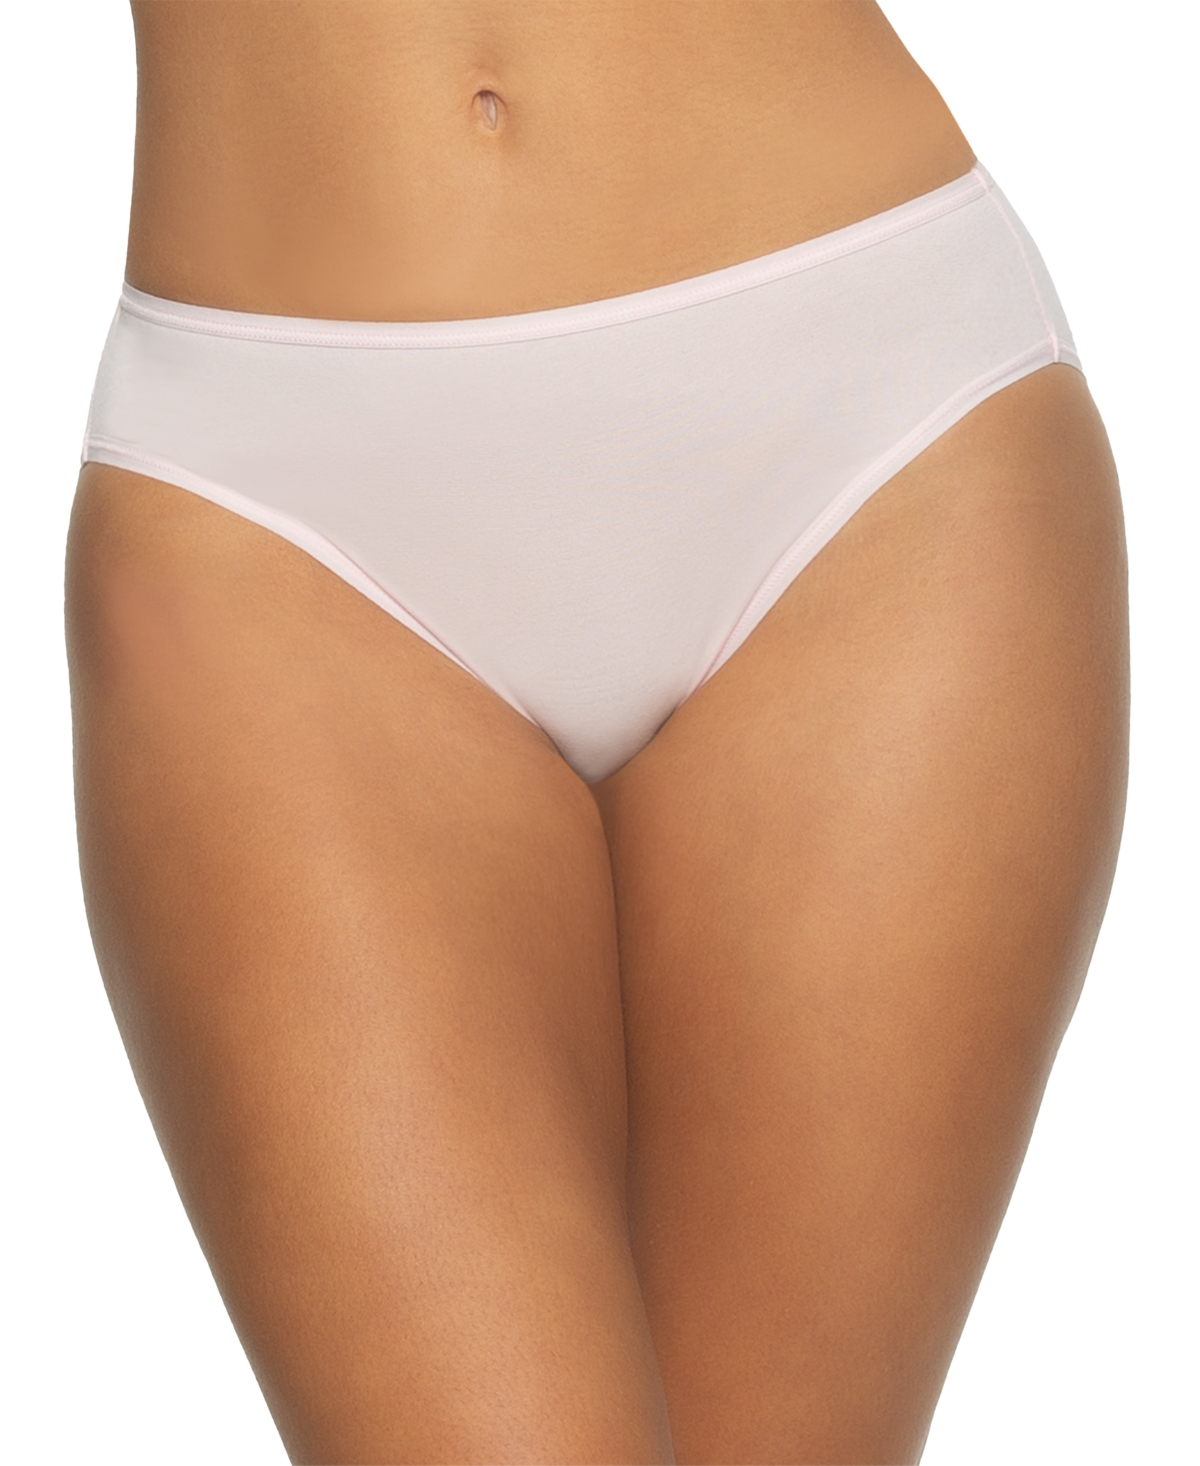 Women's 5-Pk. Hipster Underwear 650180P5, Created for Macy's - Wmn/wht/br